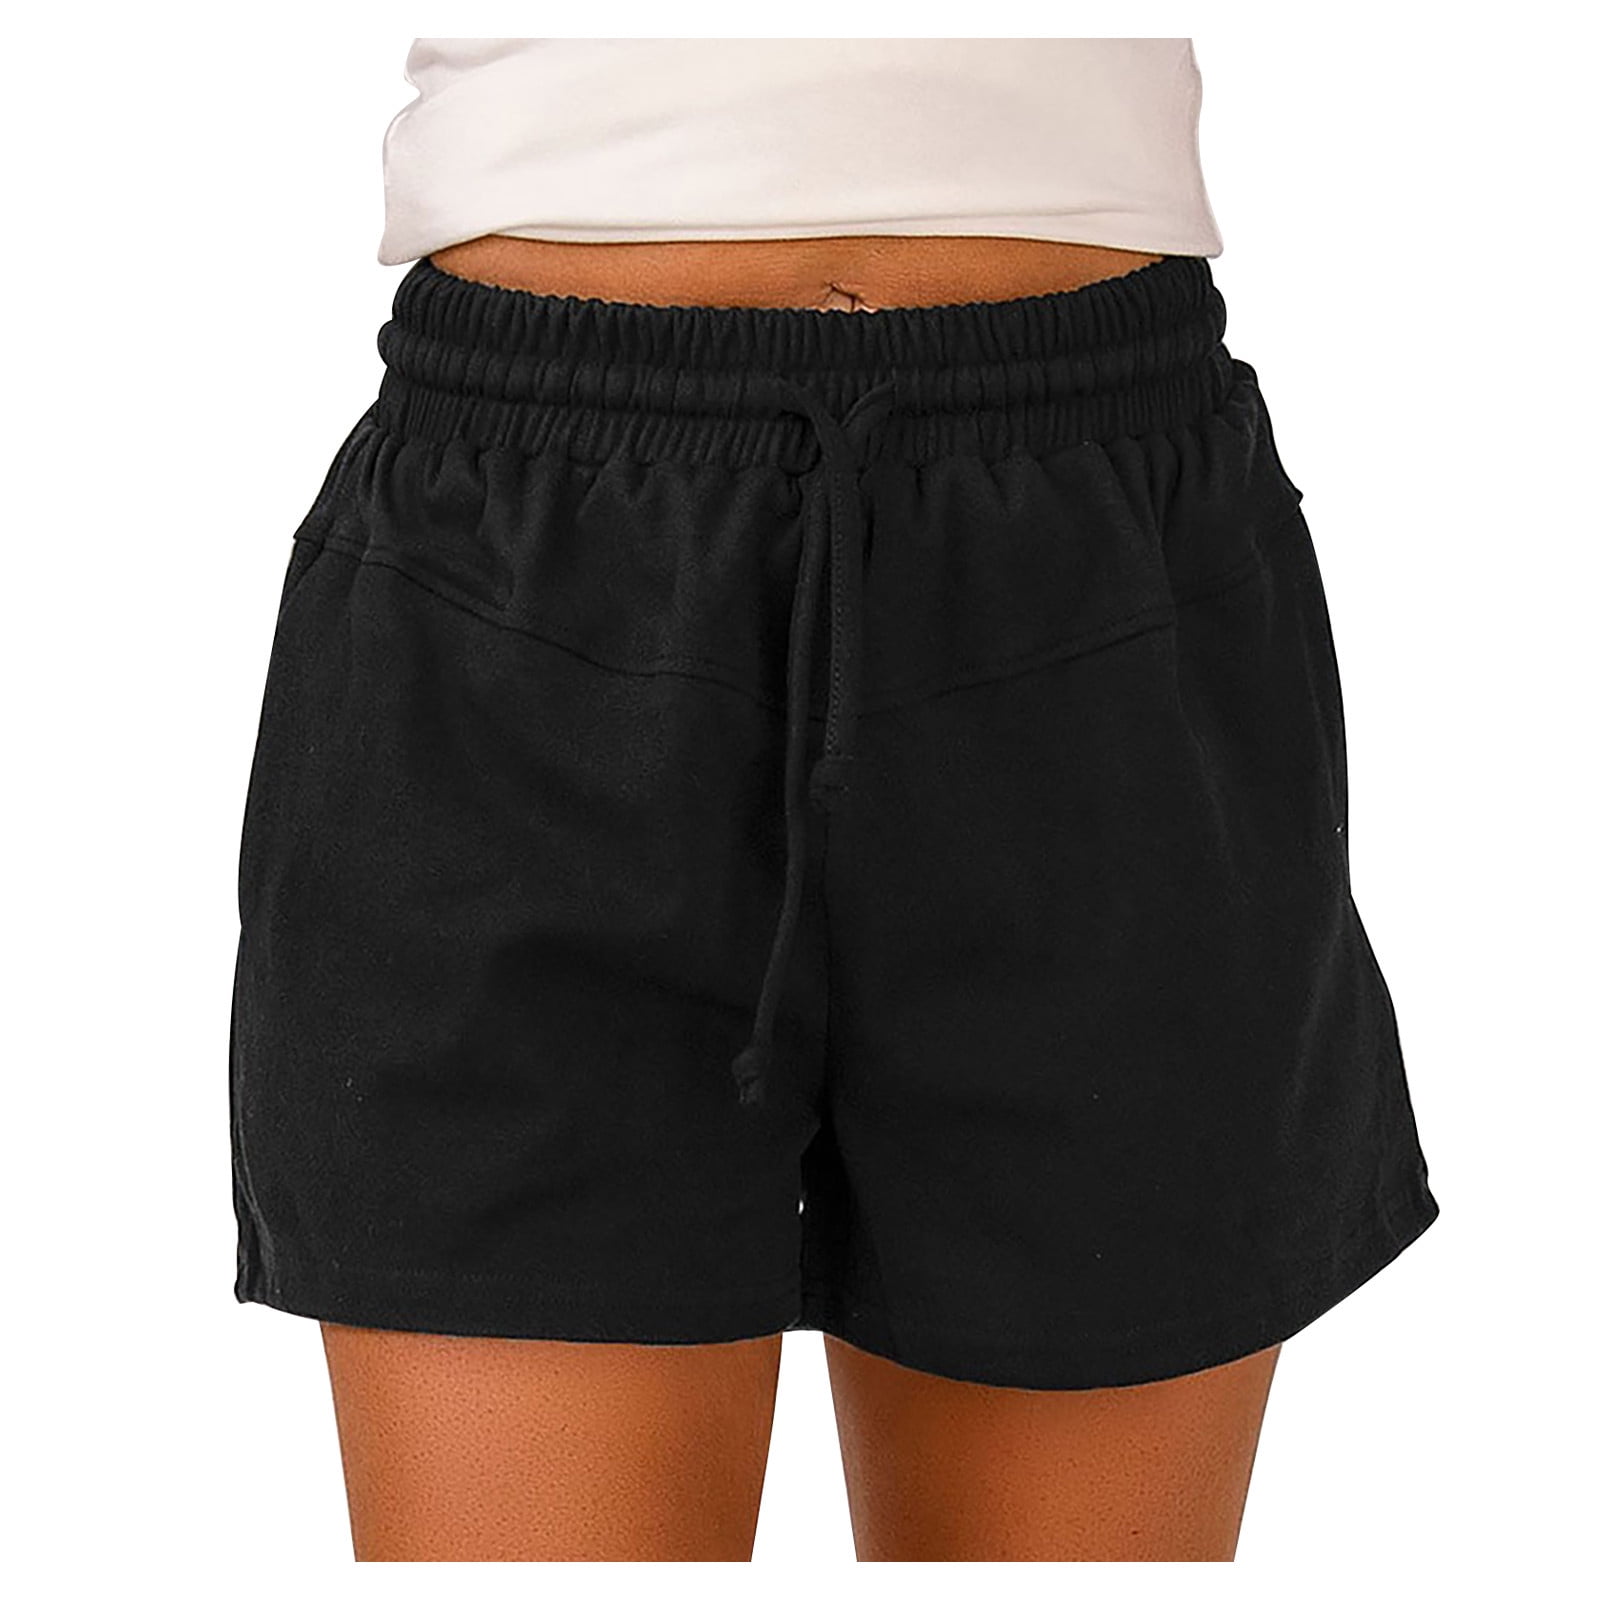 Aurefin High Waisted Athletic Shorts for Women, Womens Plus Size